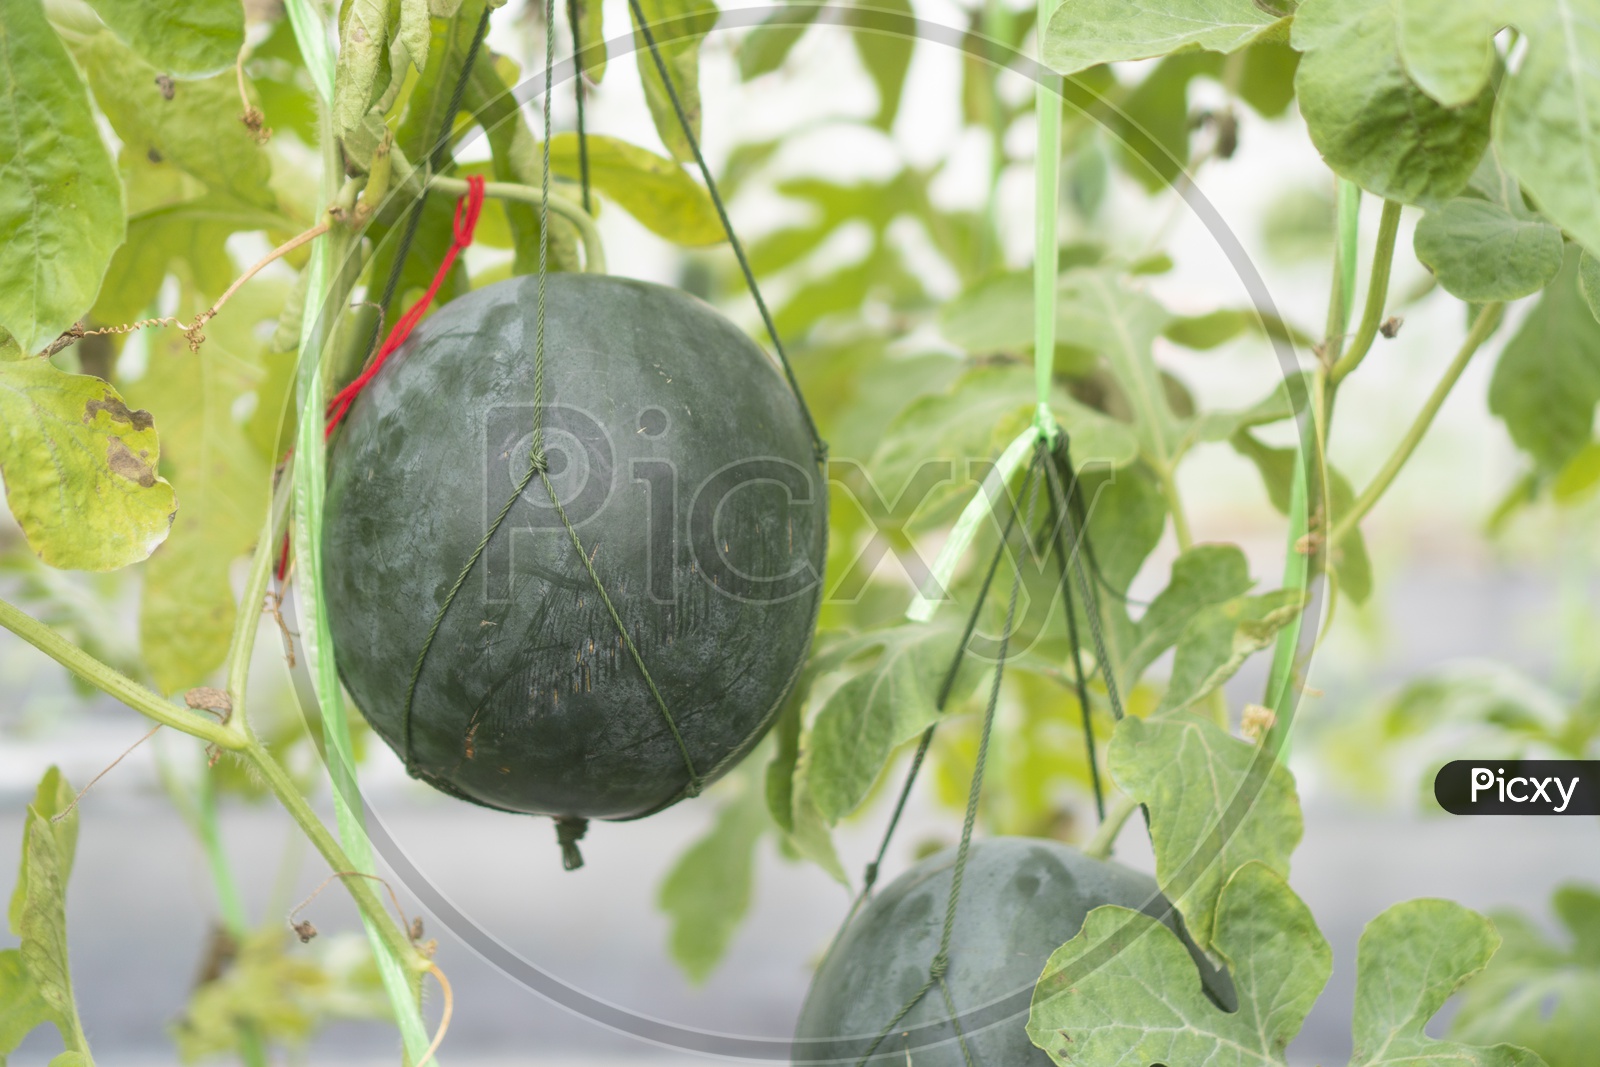 Watermelon Farming In Green Houses Using Technology